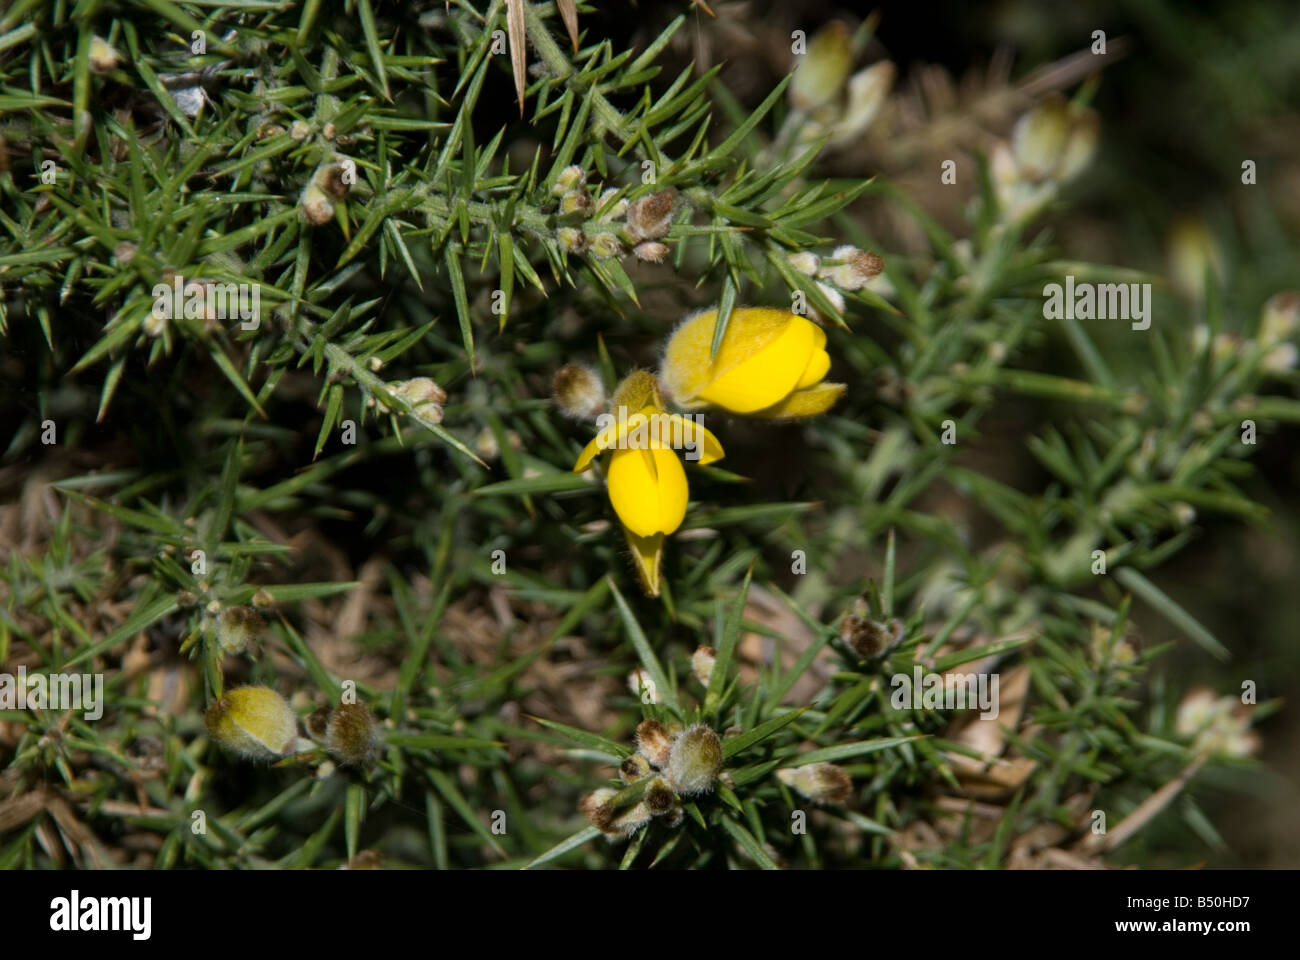 A gorse flower on the Ashdown forest Stock Photo